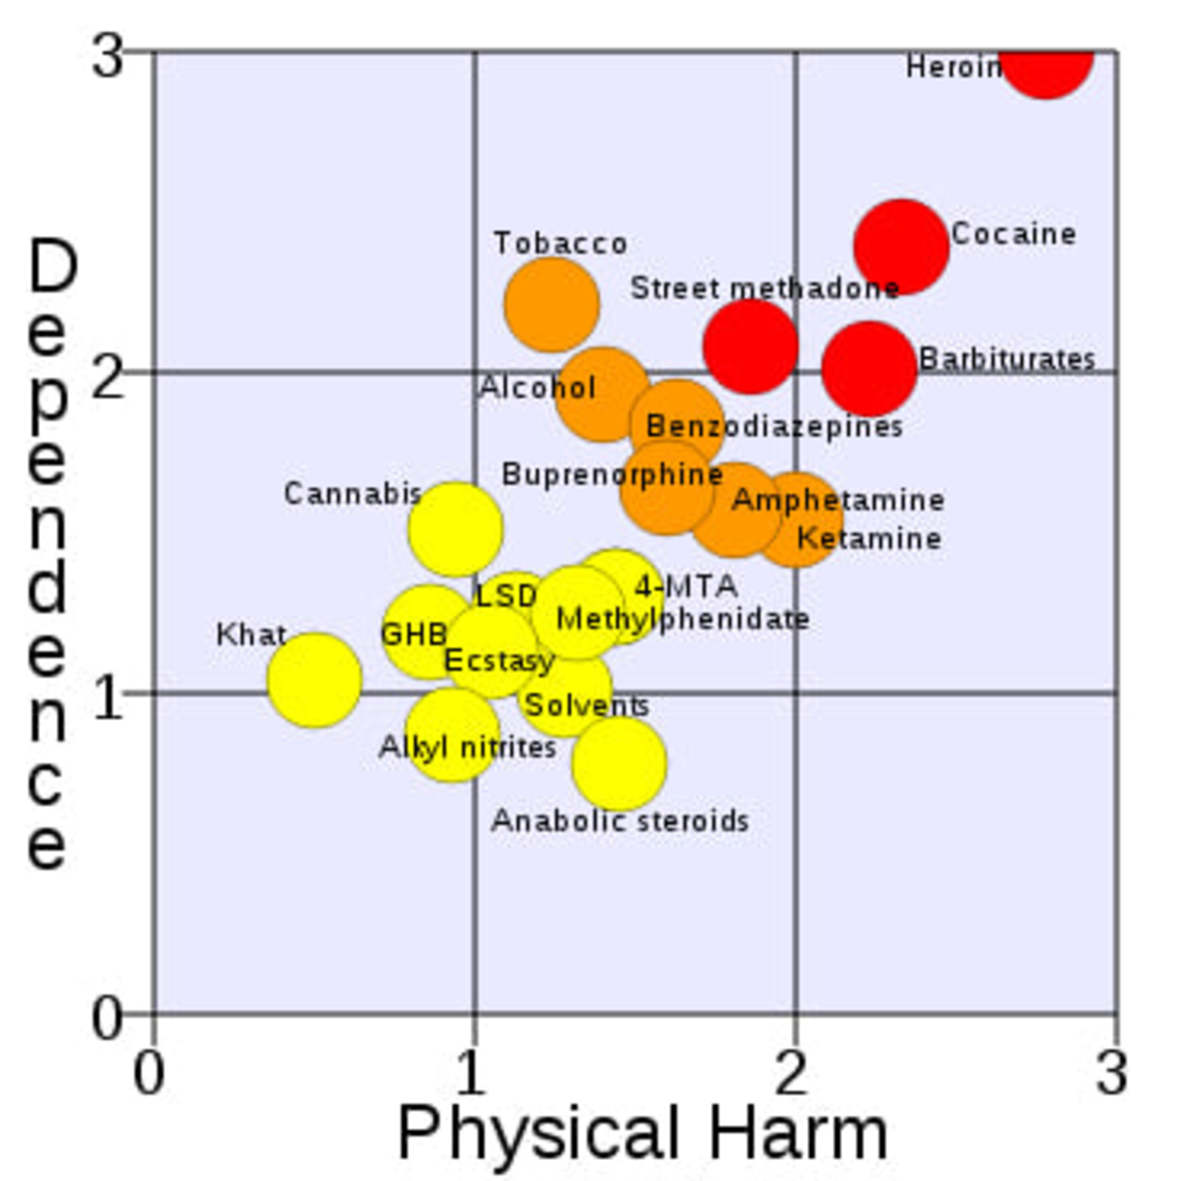 A rational scale to assess the harm of drugs. Data source is the March 24, 2007 article: Nutt, David, Leslie A King, William Saulsbury, Colin Blakemore. "Development of a rational scale to assess the harm of drugs of potential misuse" The Lancet 2007